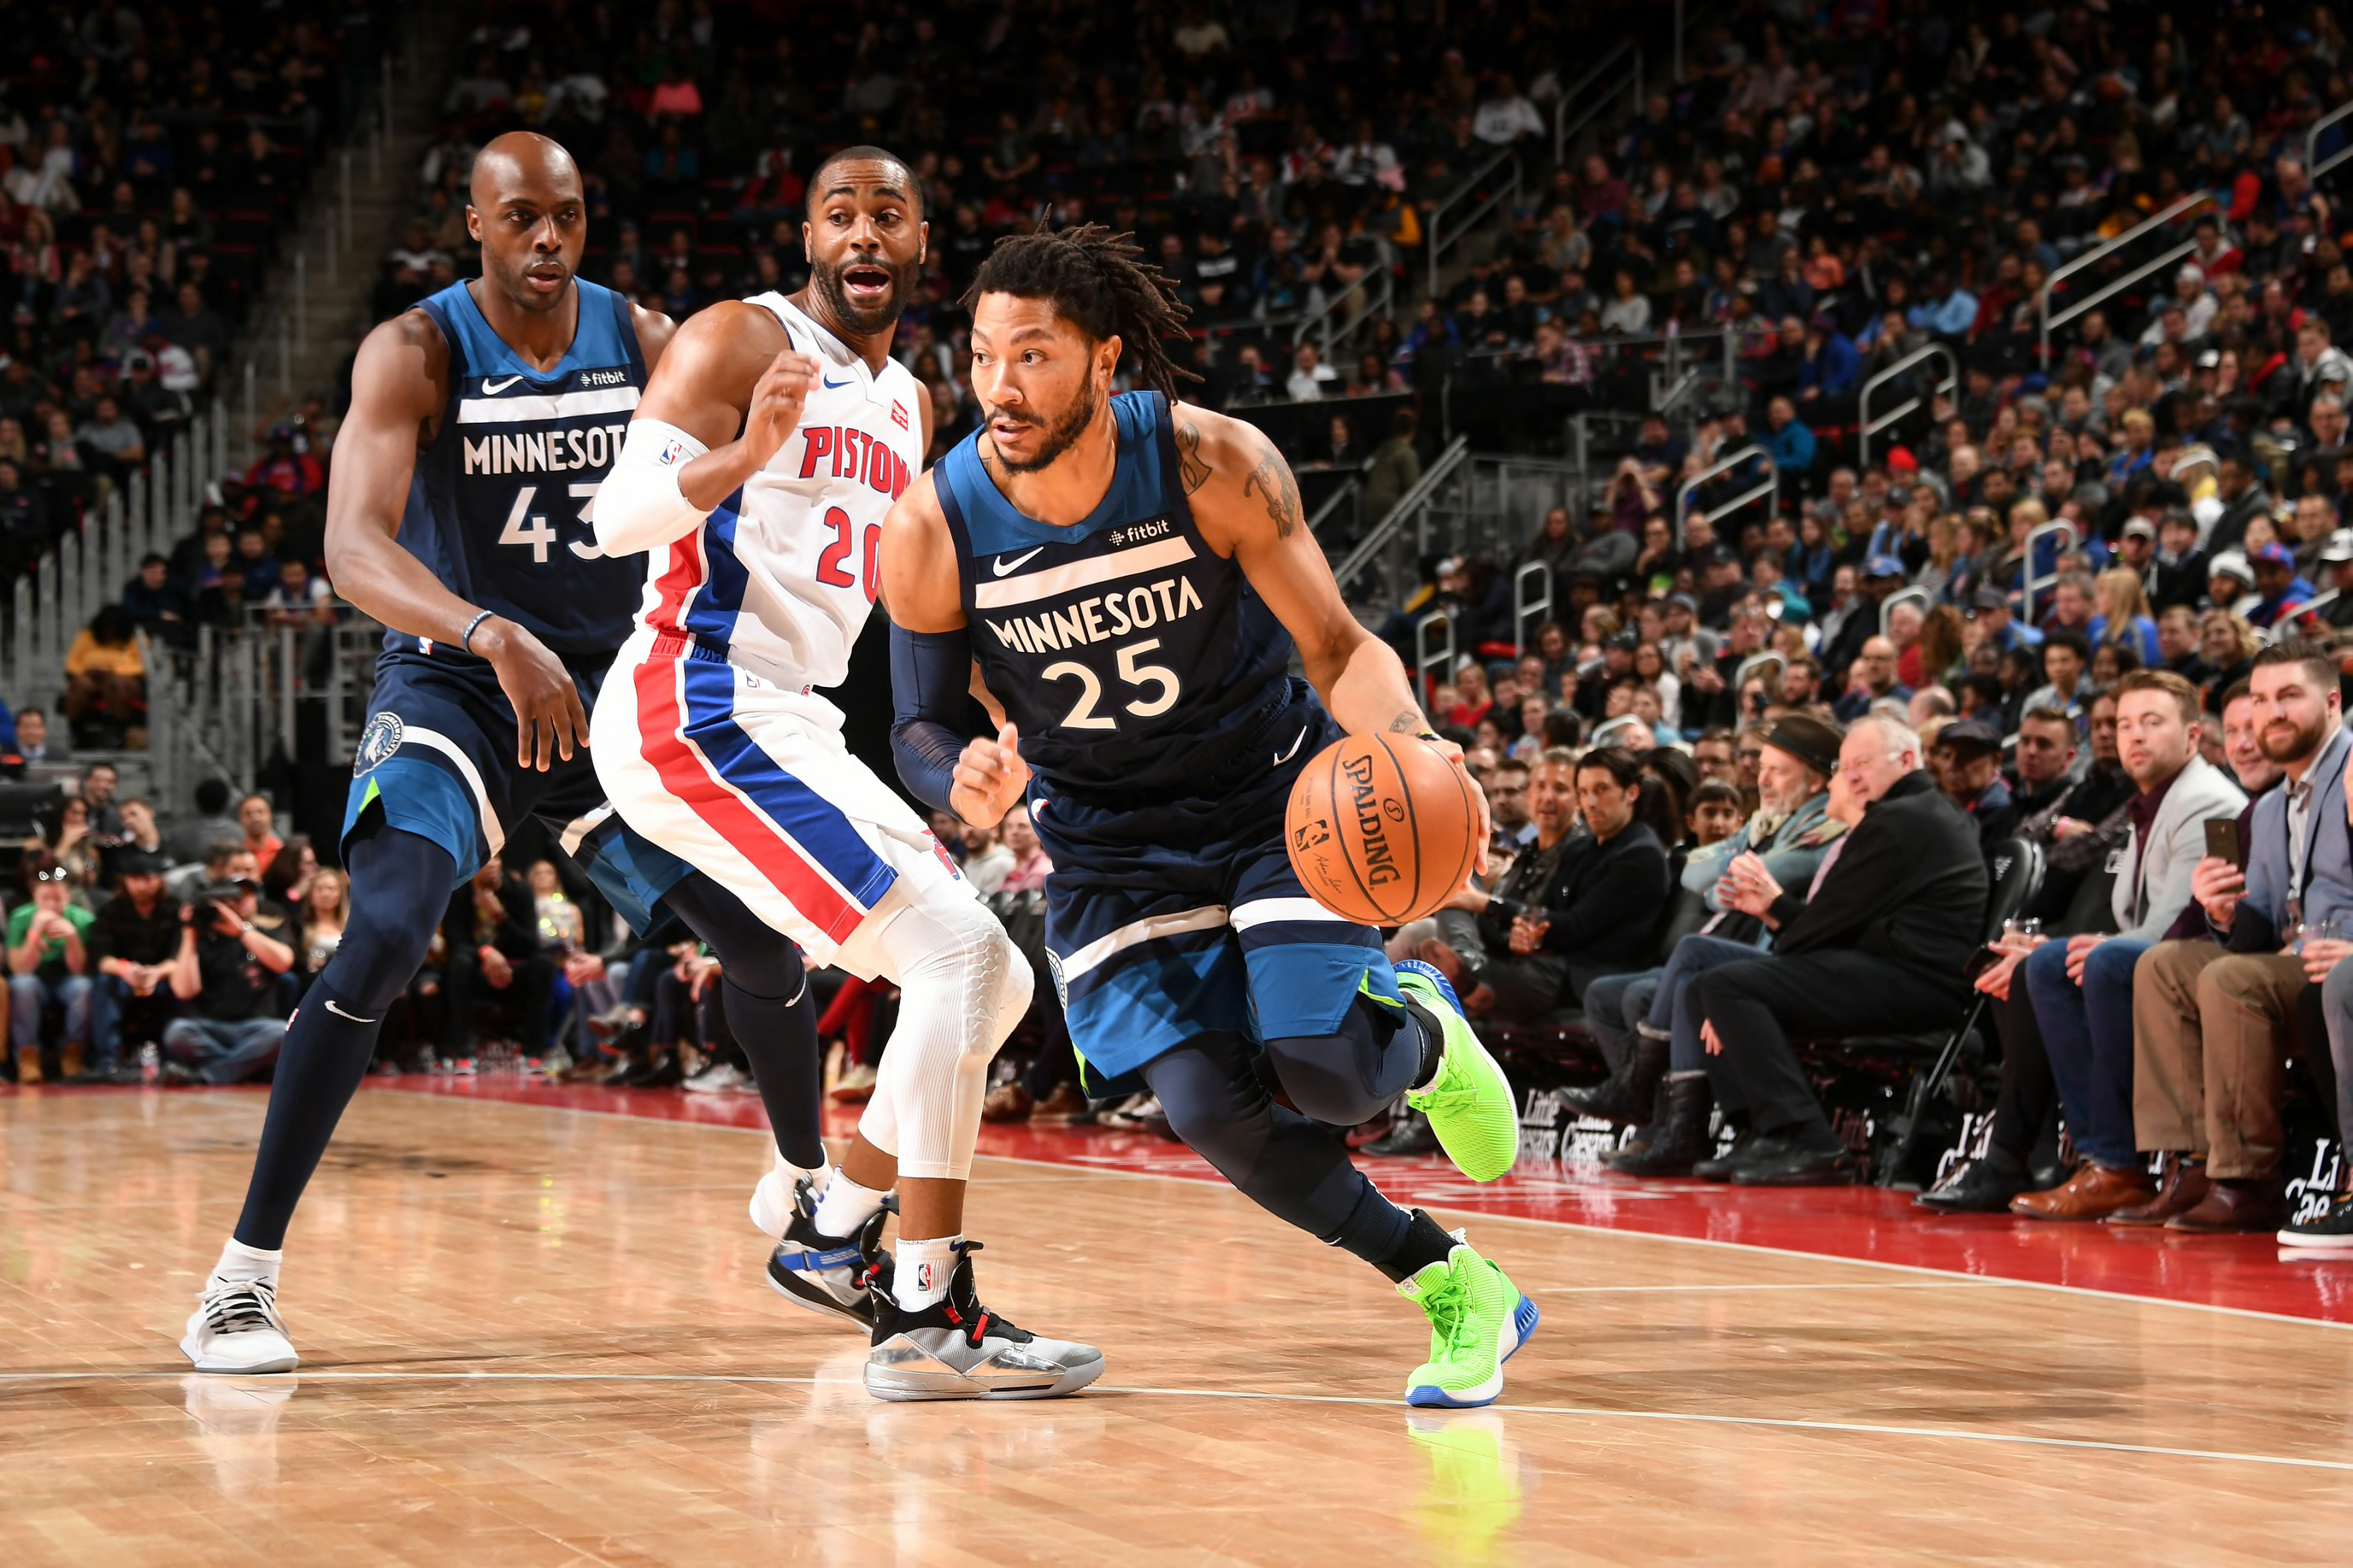 Detroit Pistons hope Derrick Rose signing leads to playoff success